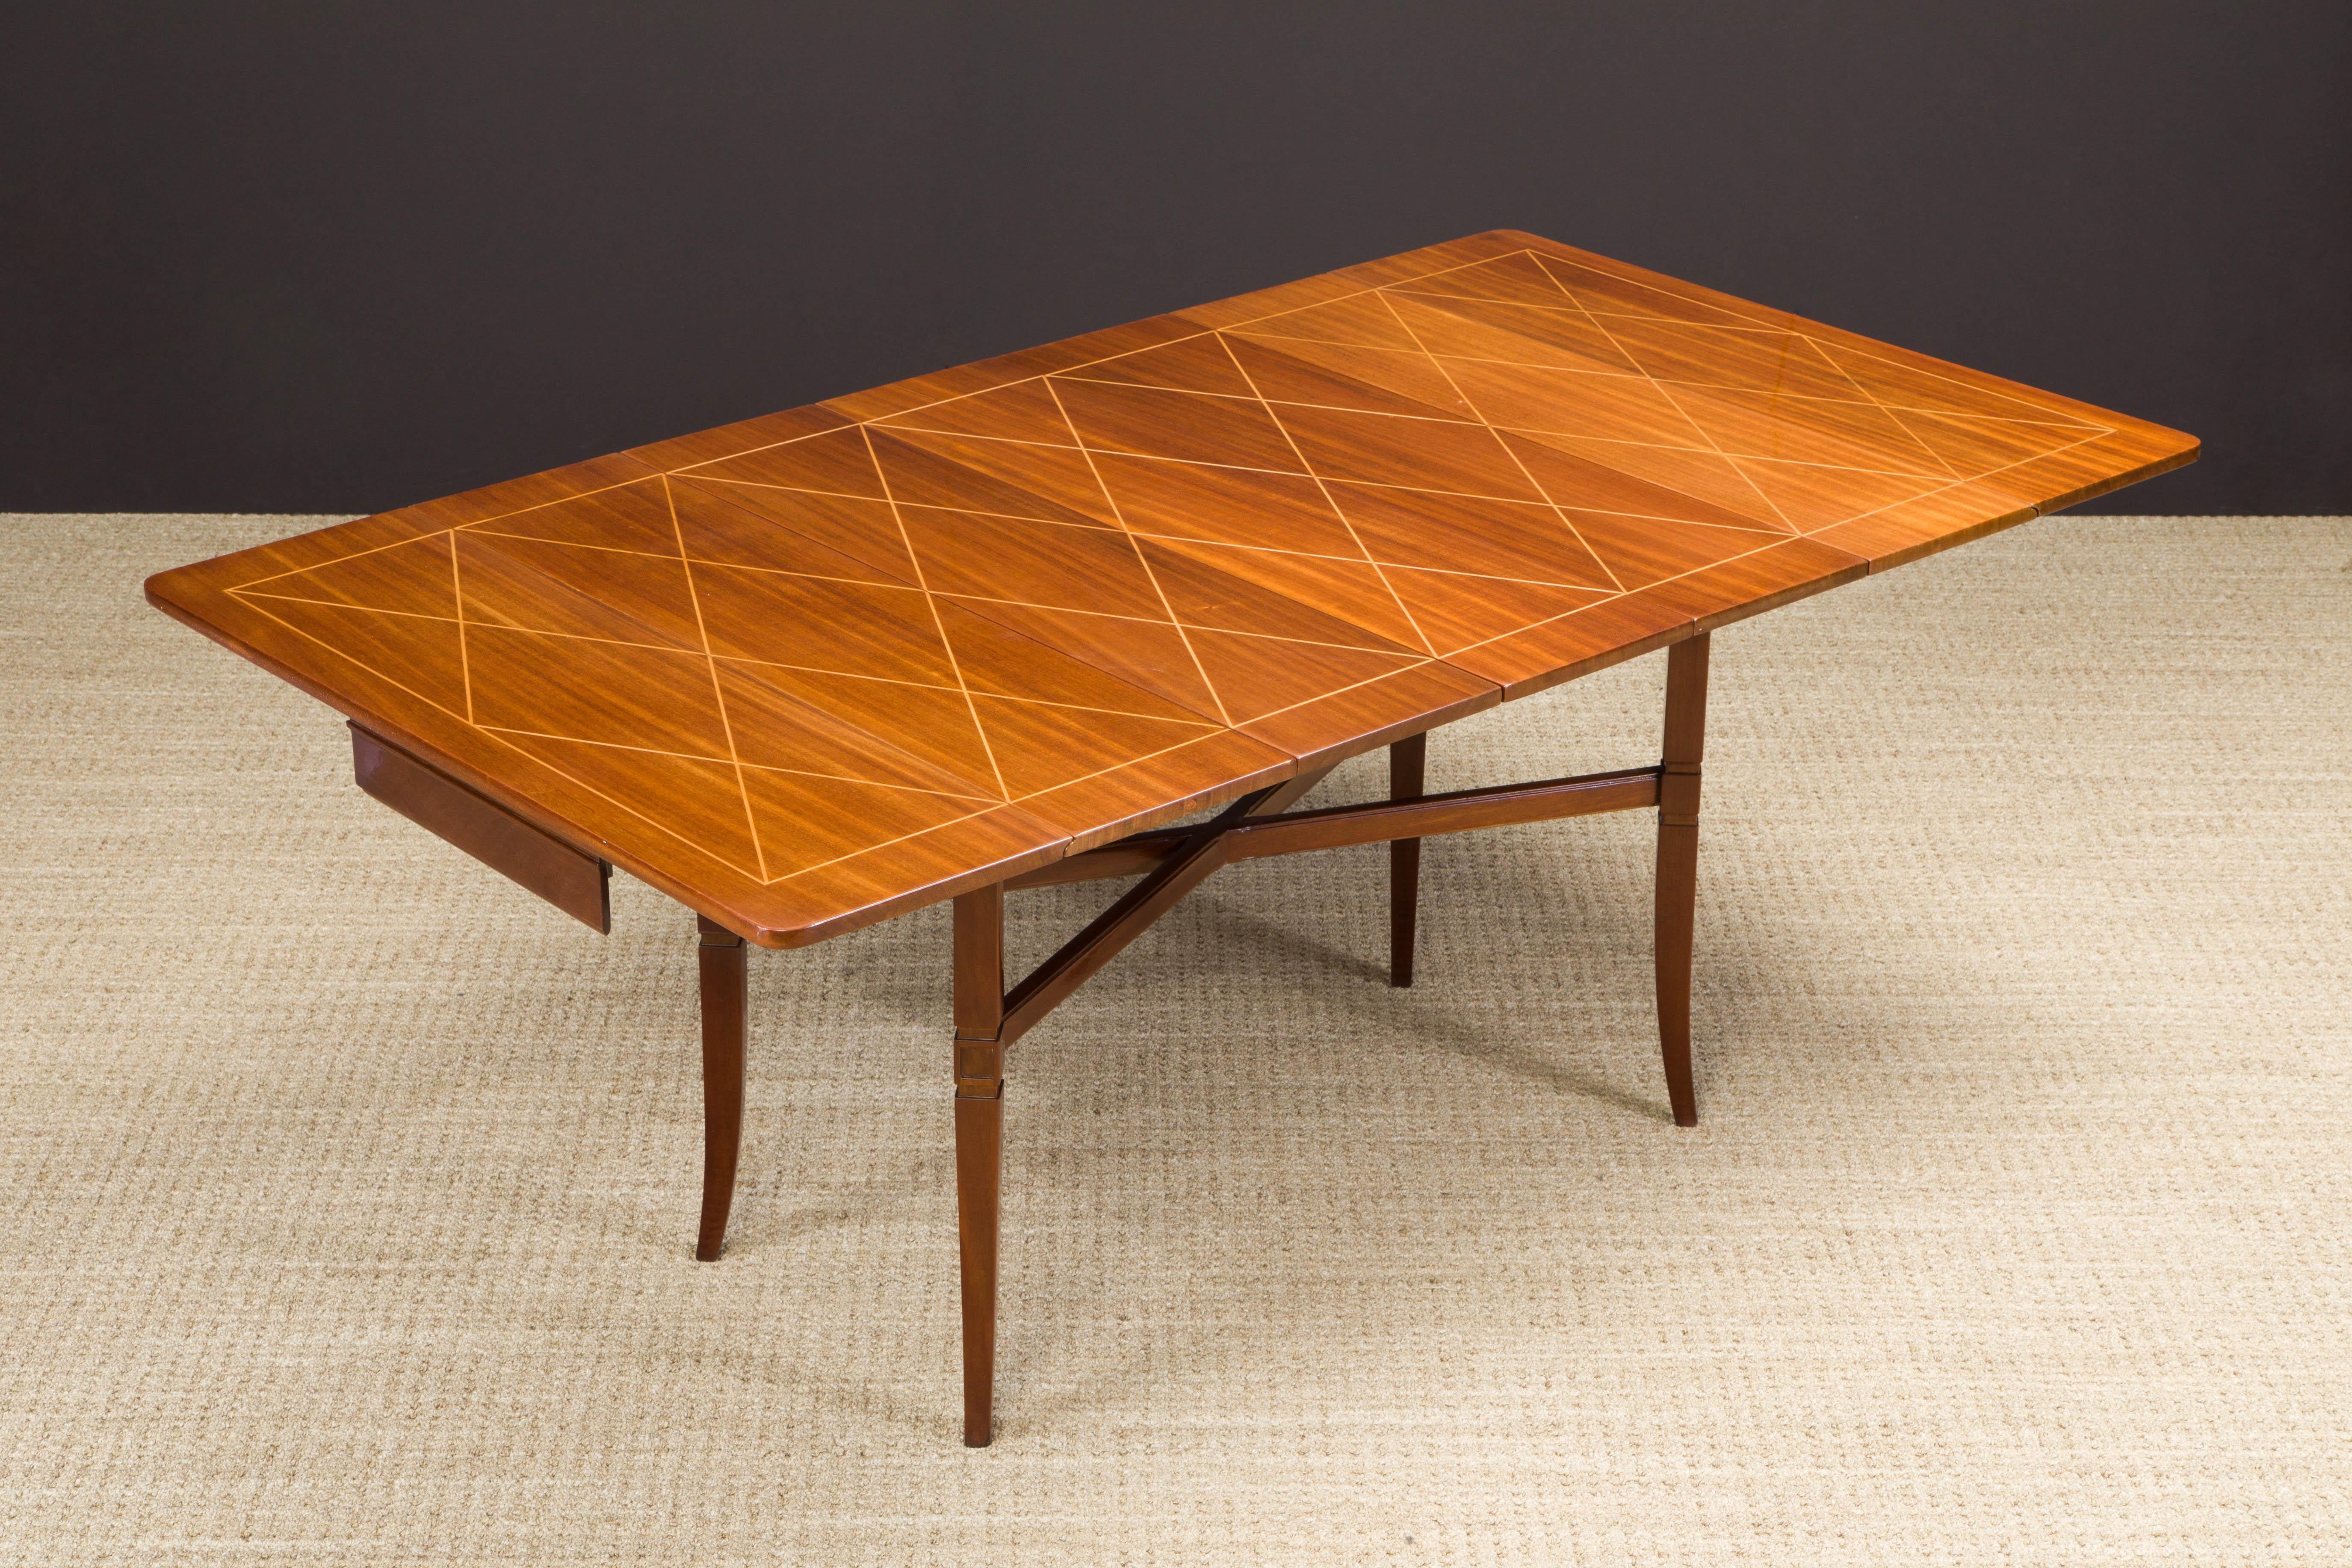 Hollywood Regency Tommi Parzinger Mahogany Convertible Desk, Dining & Console Table, 1951, Signed 